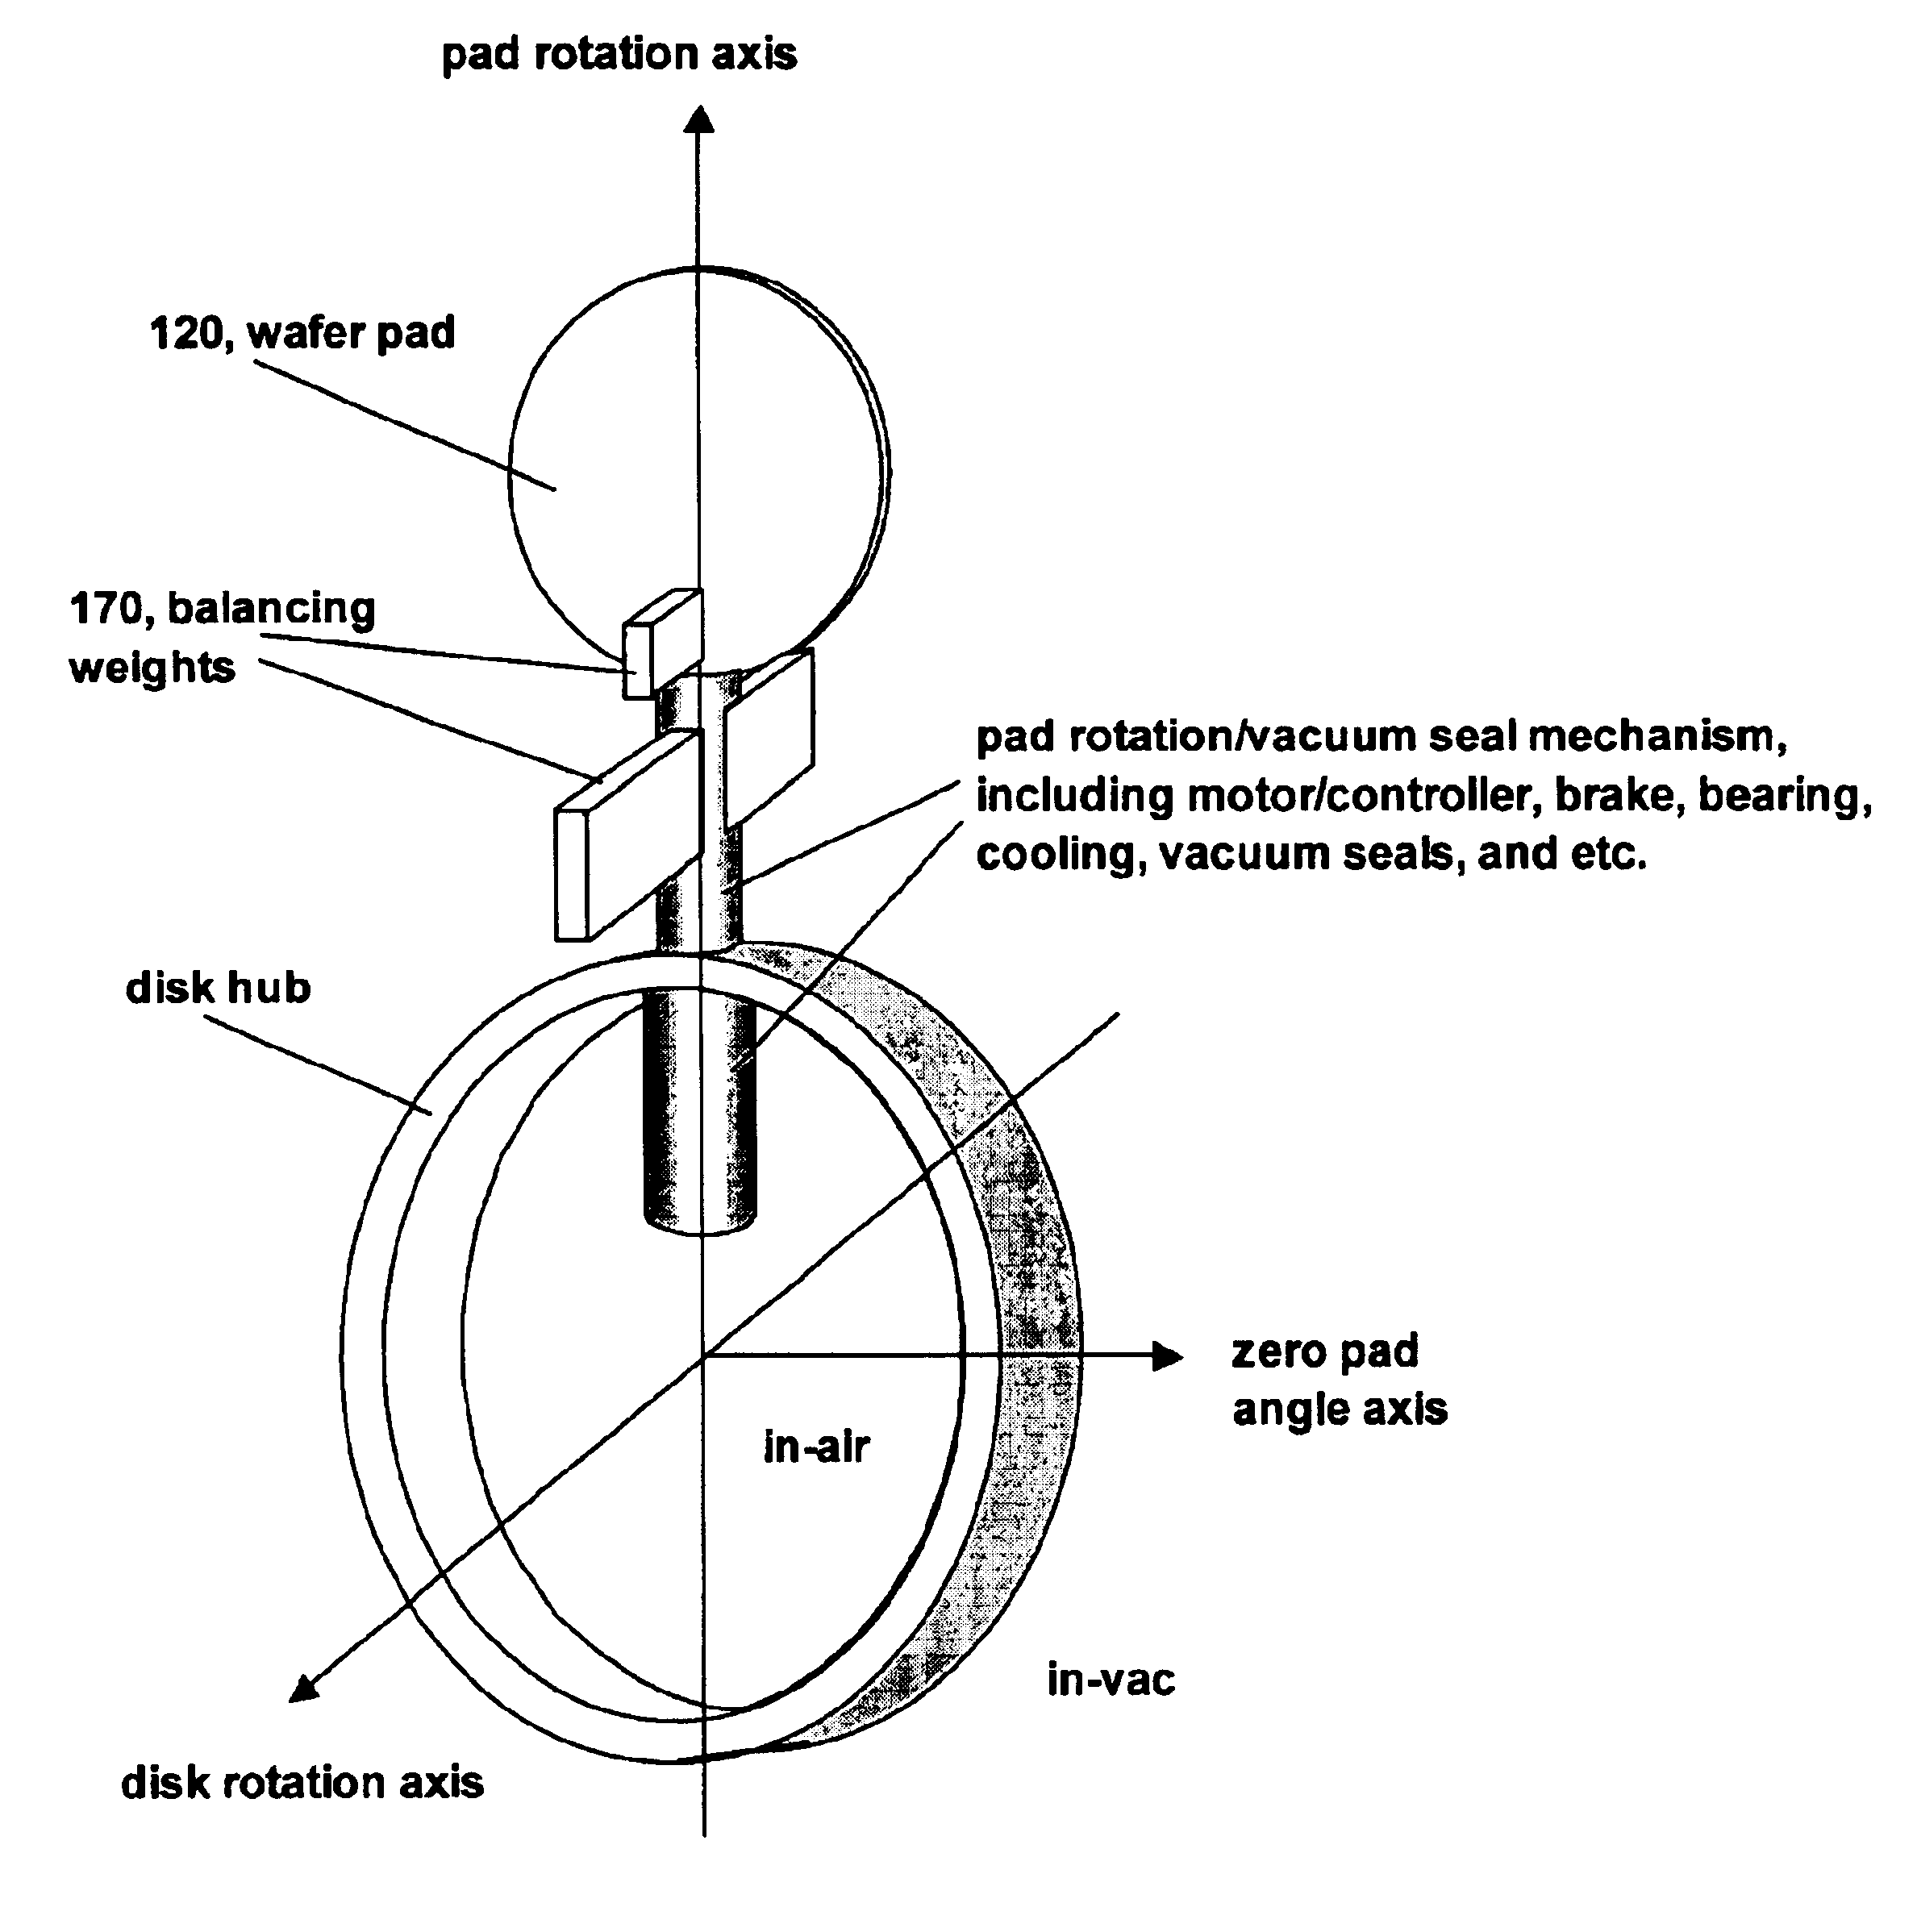 Apparatus and method for reducing implant angle variations across a large wafer for a batch disk